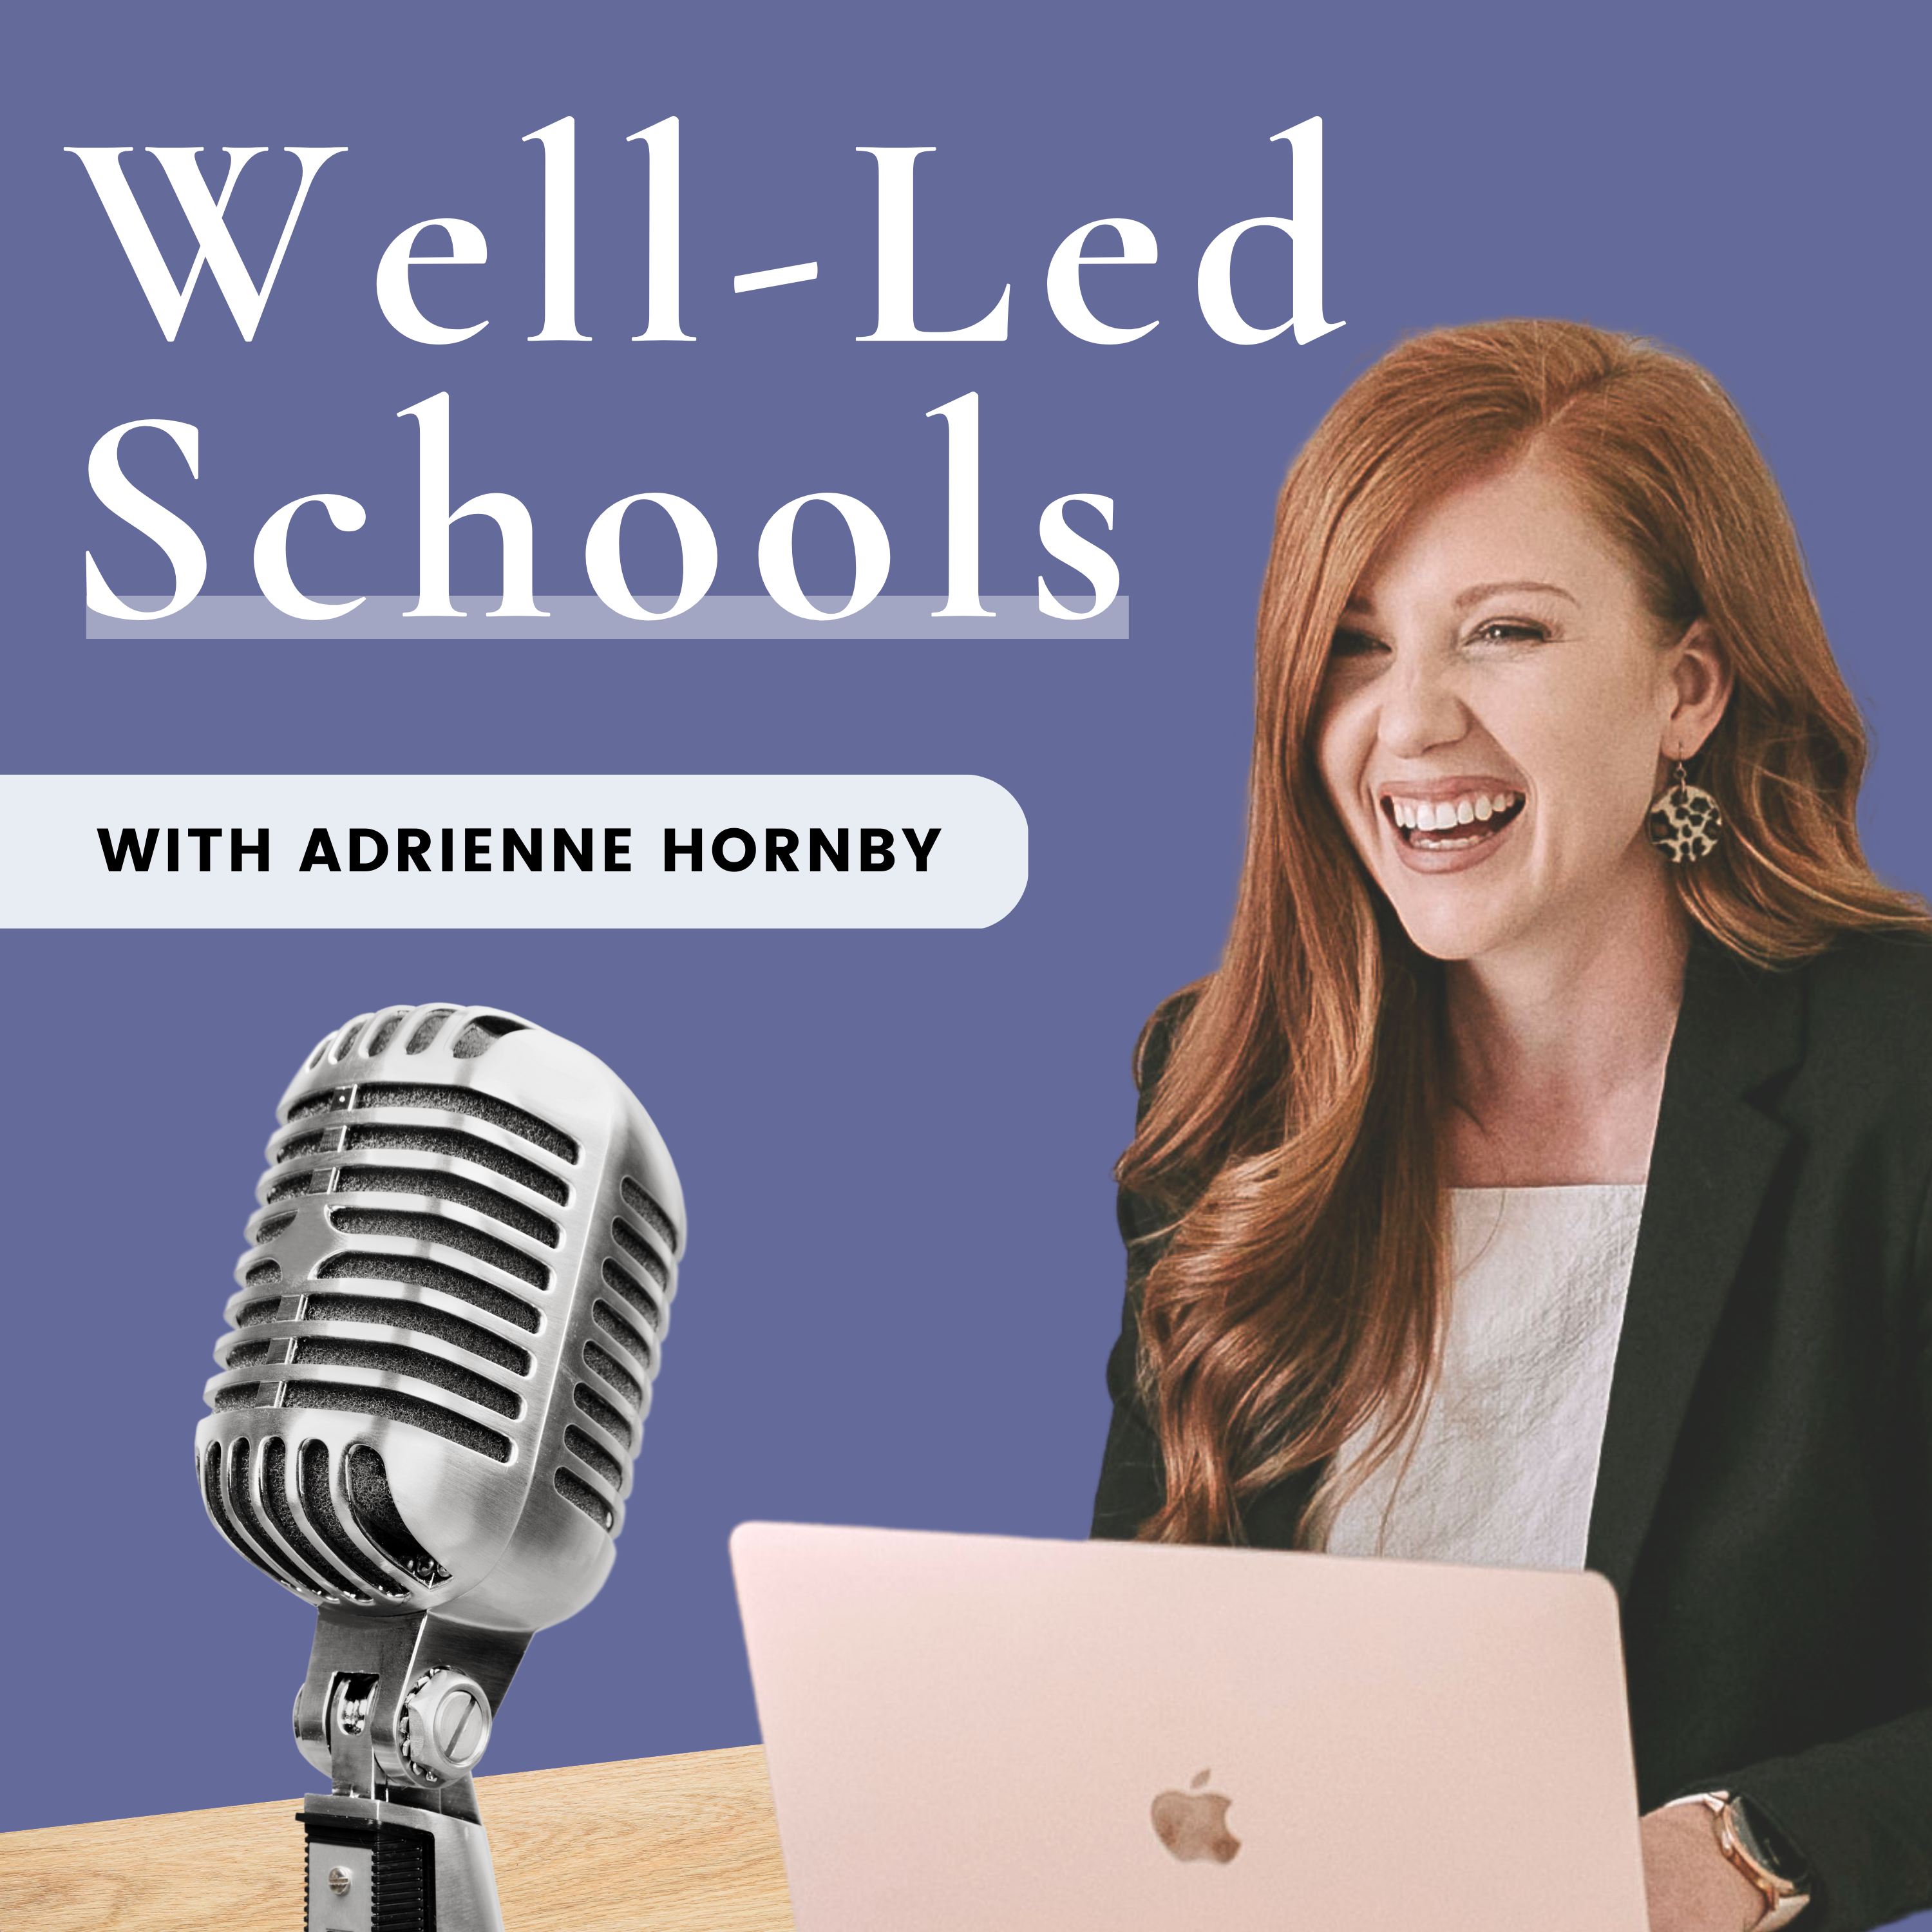 S2E8: How To Better Support Your School Community Through Trauma-Informed Practices With Megan Corcoran